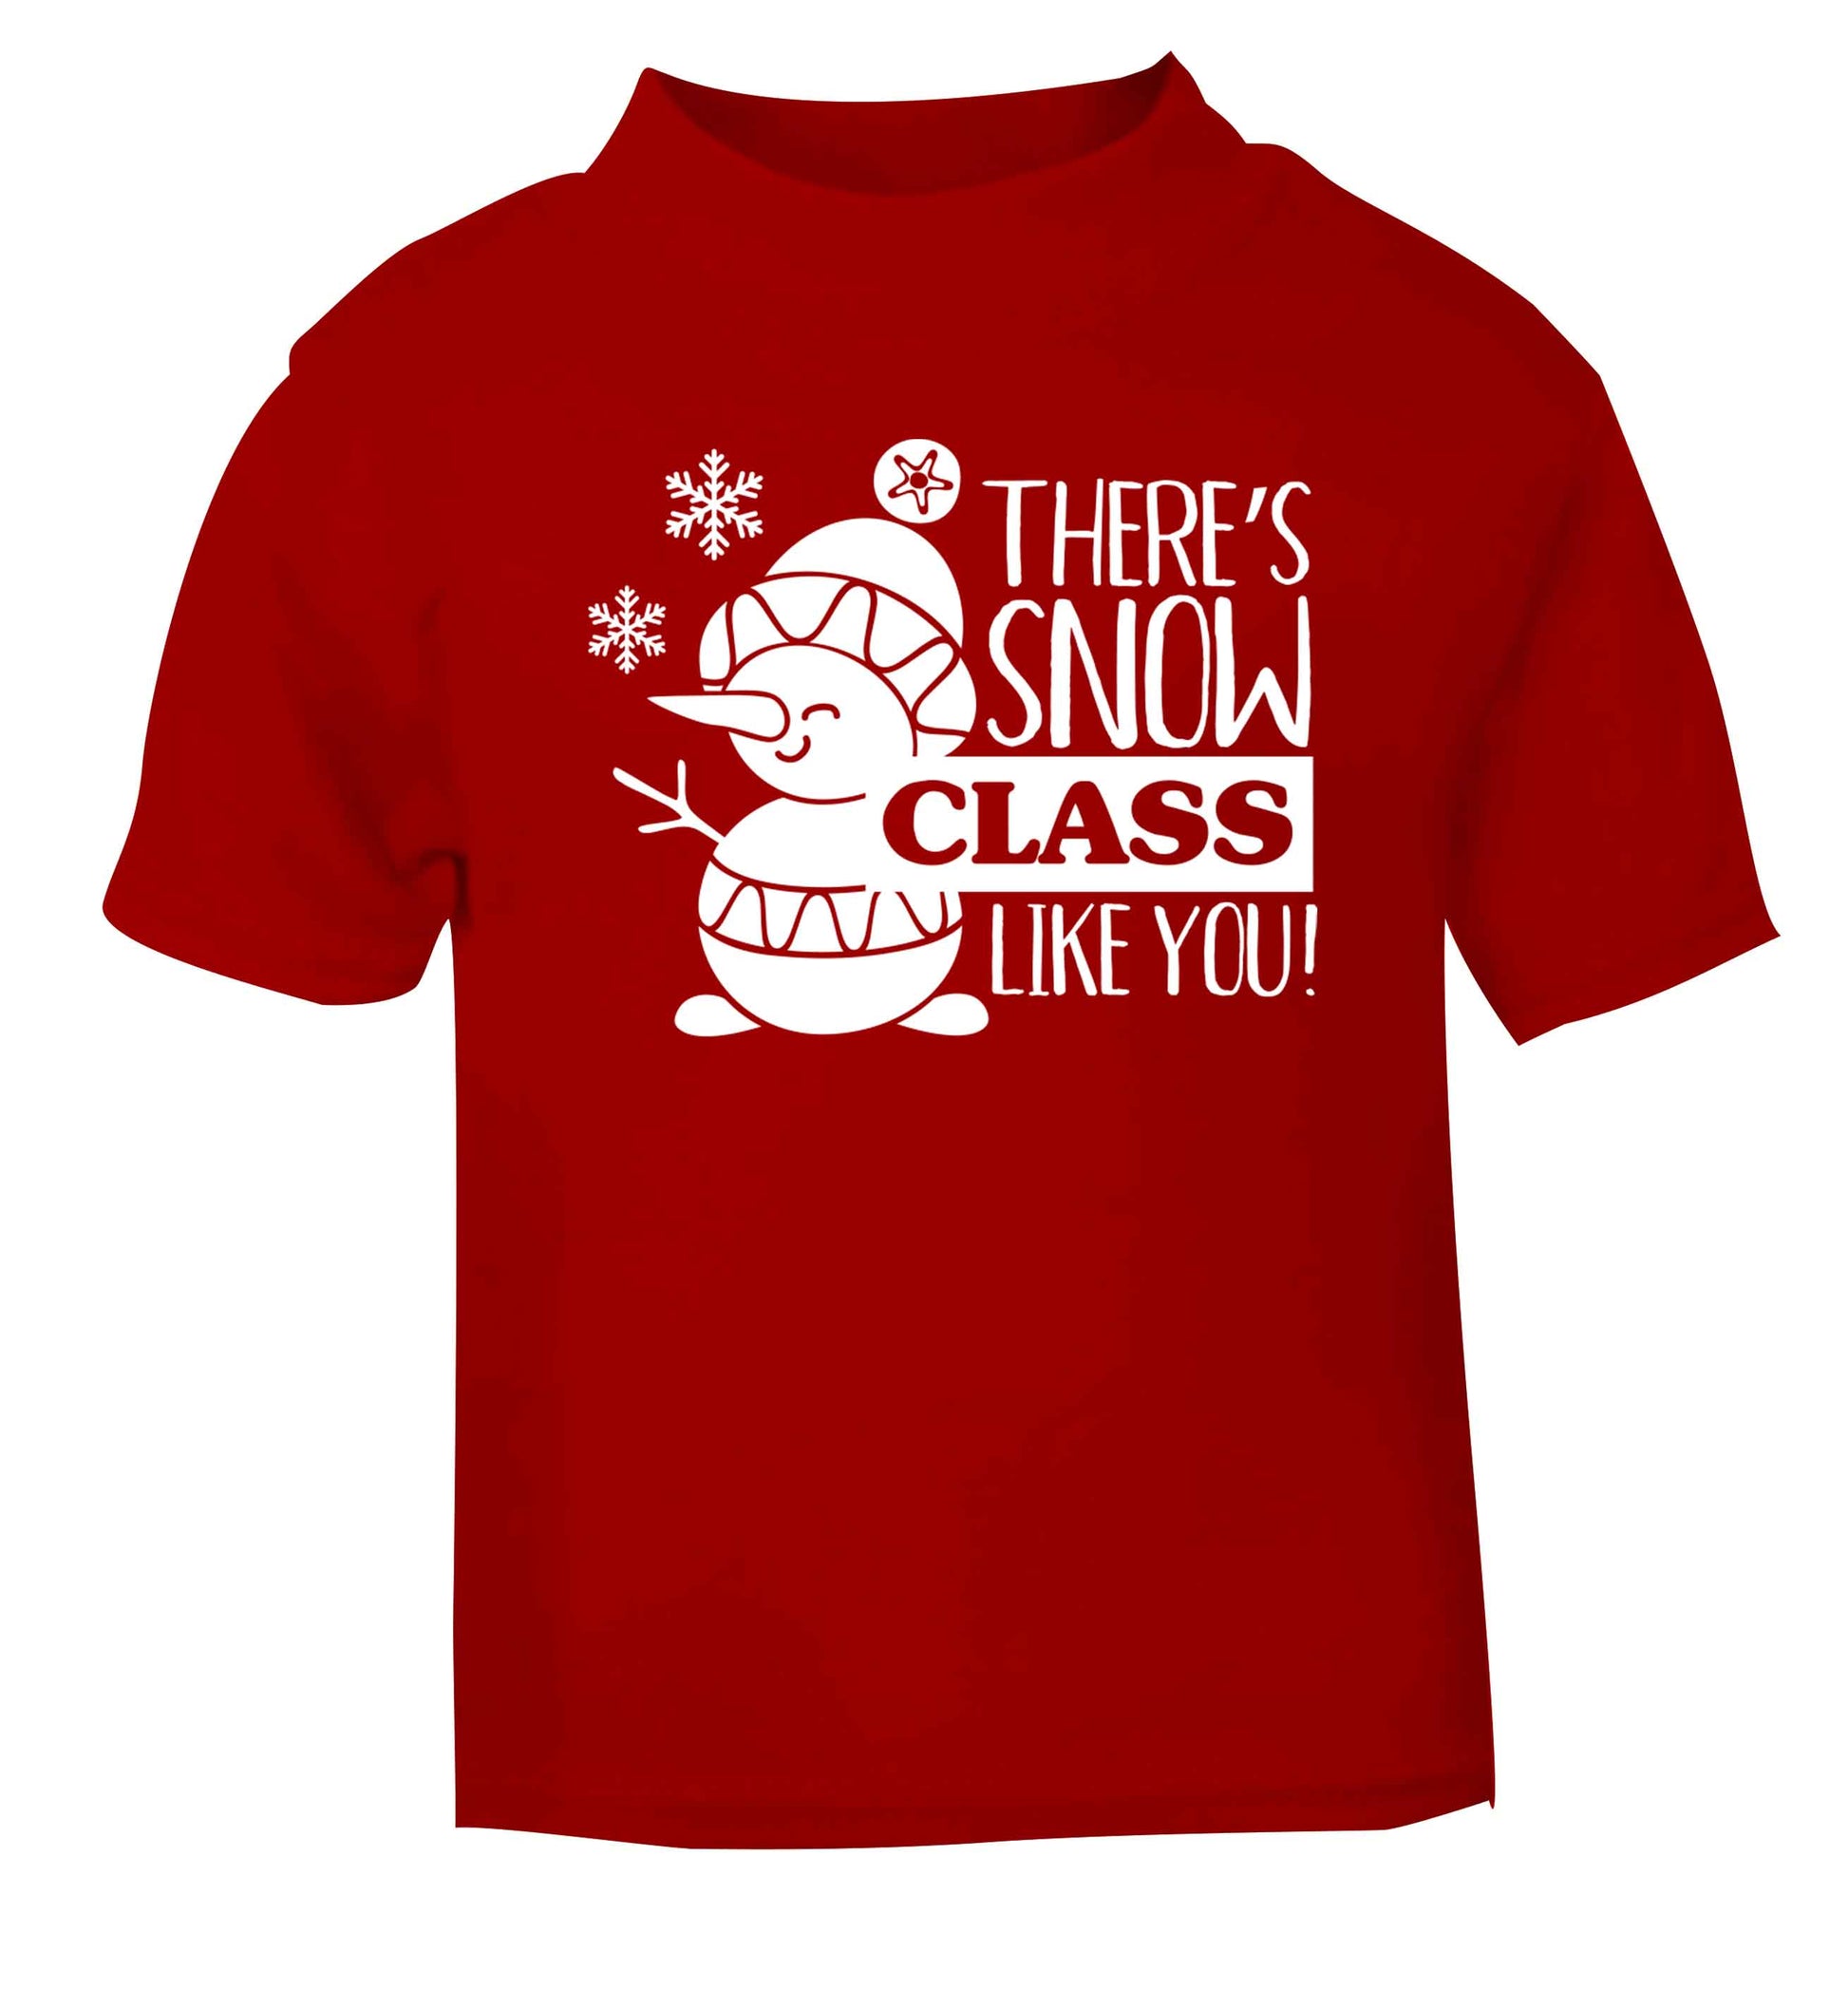 There's snow class like you red baby toddler Tshirt 2 Years